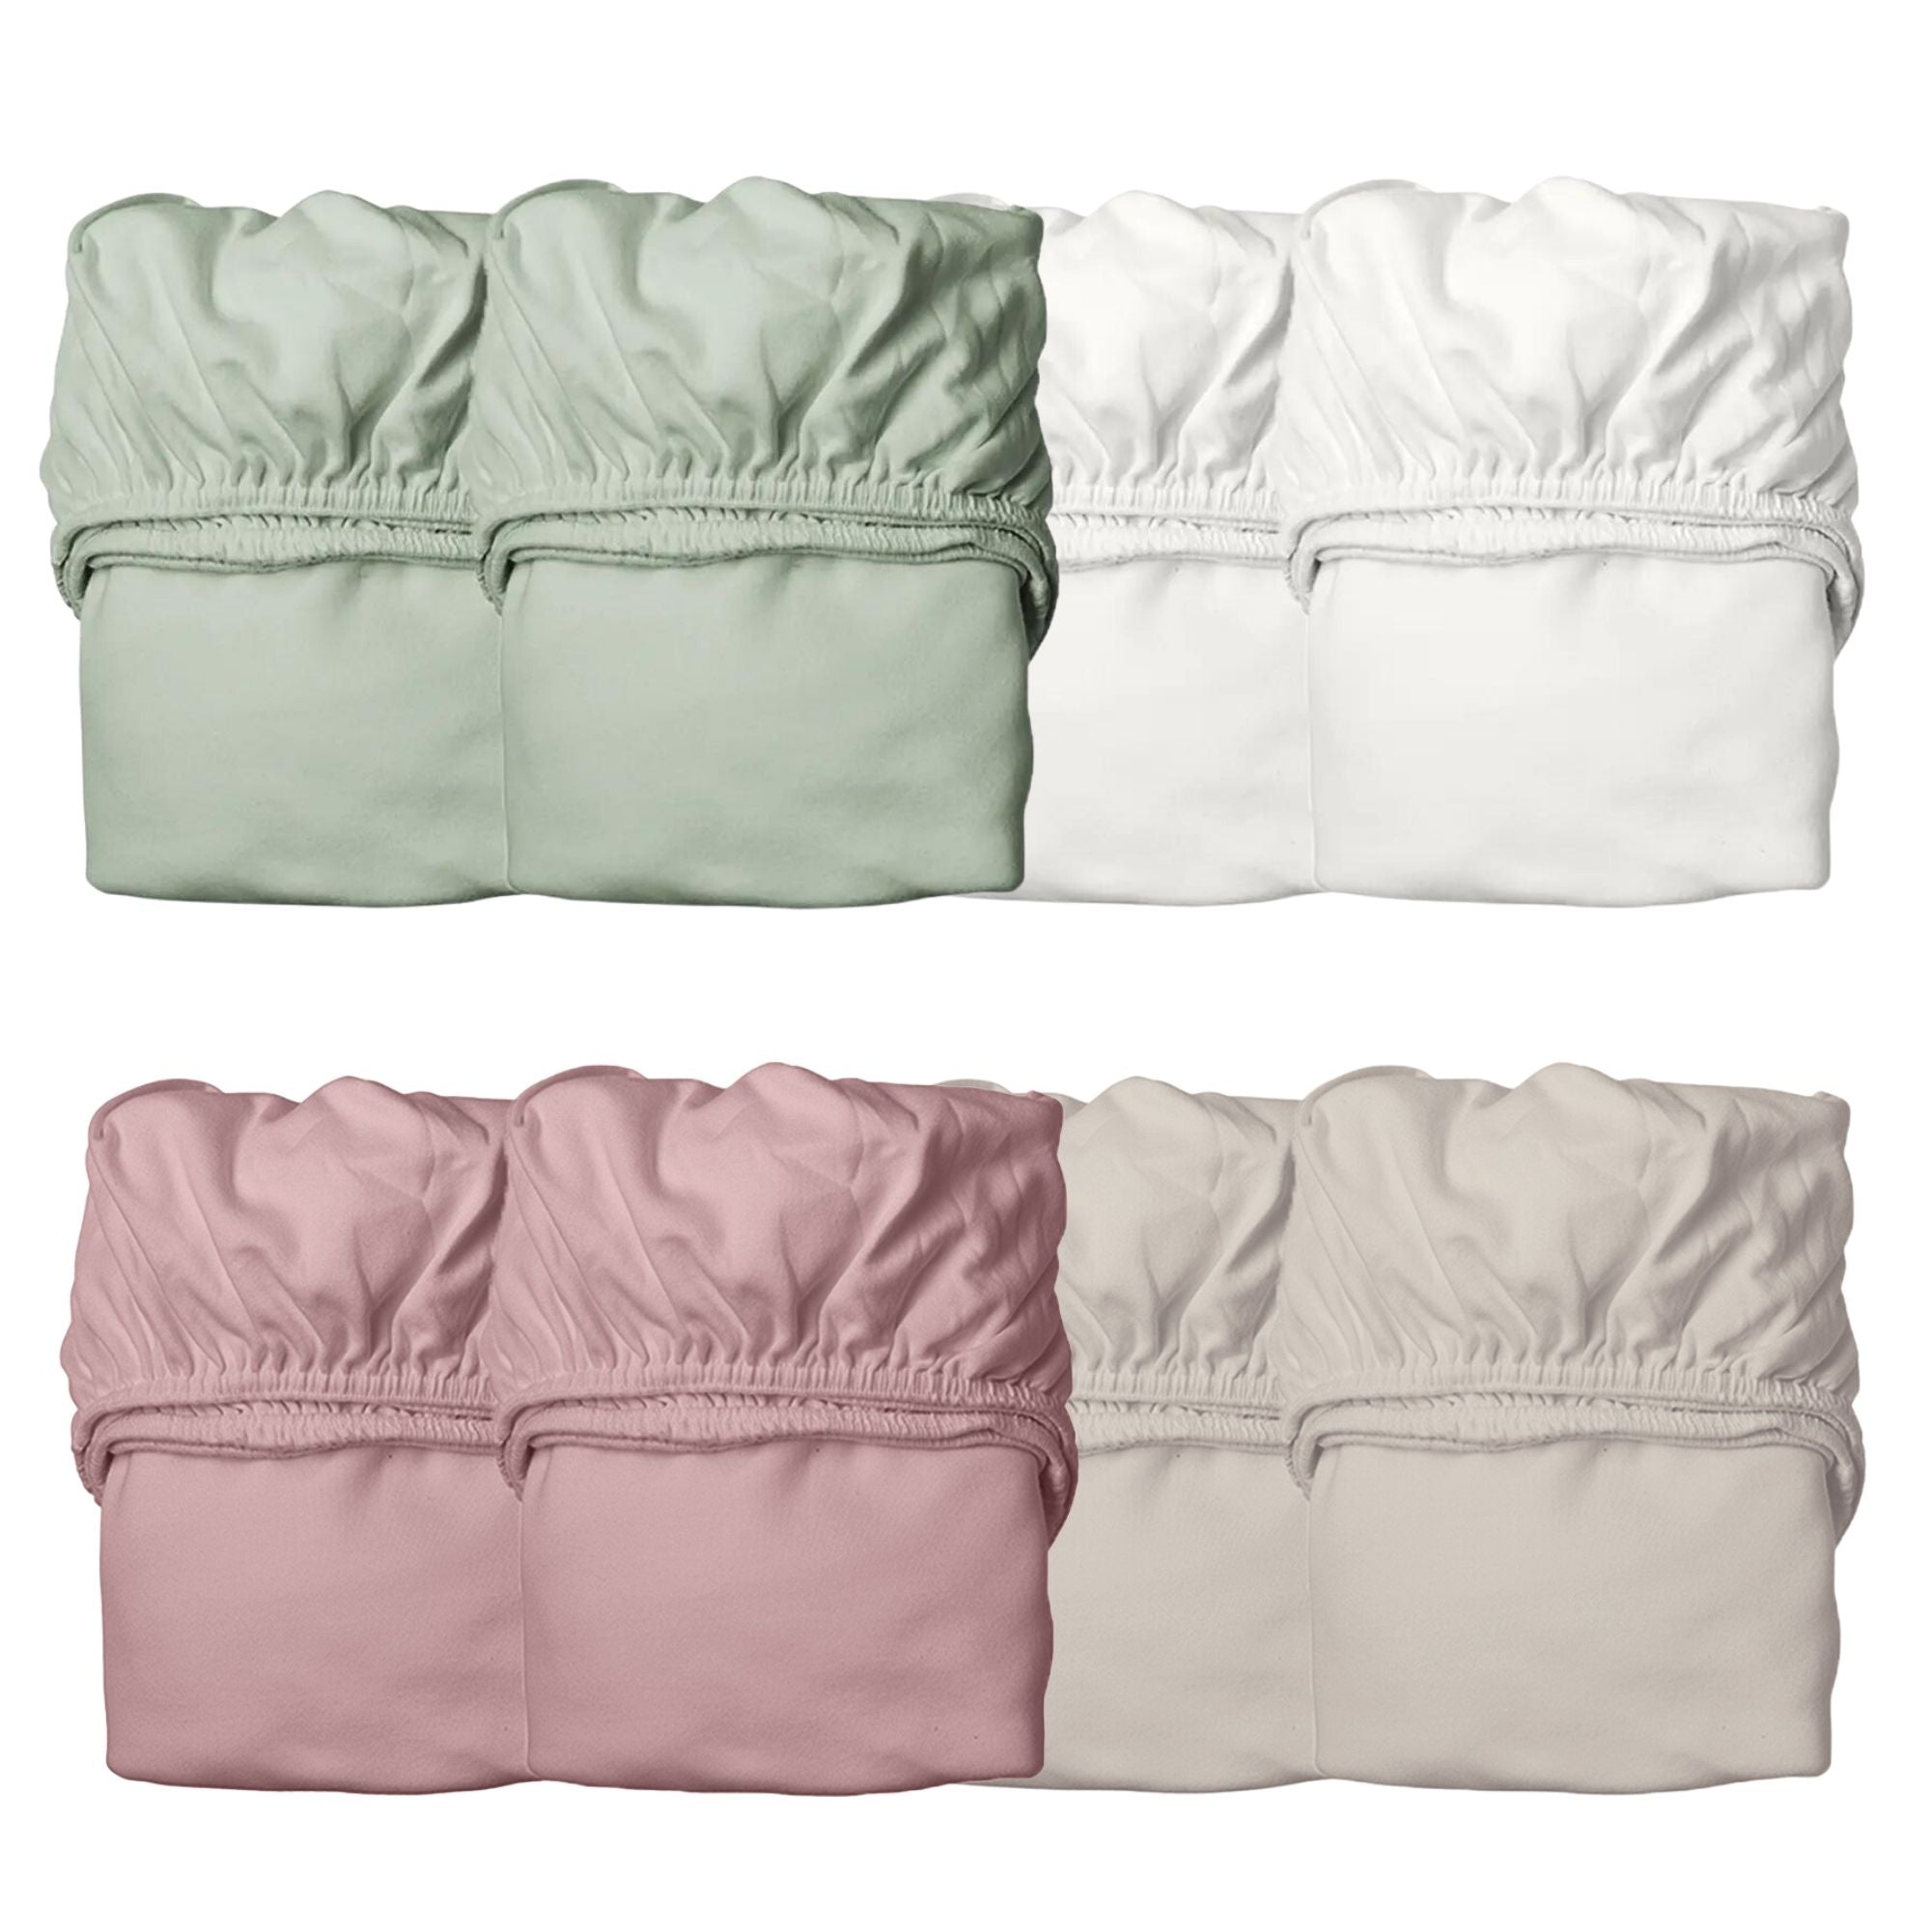 Order the SnüzKot Junior Bed Fitted Sheet 2-Pack online - Baby Plus